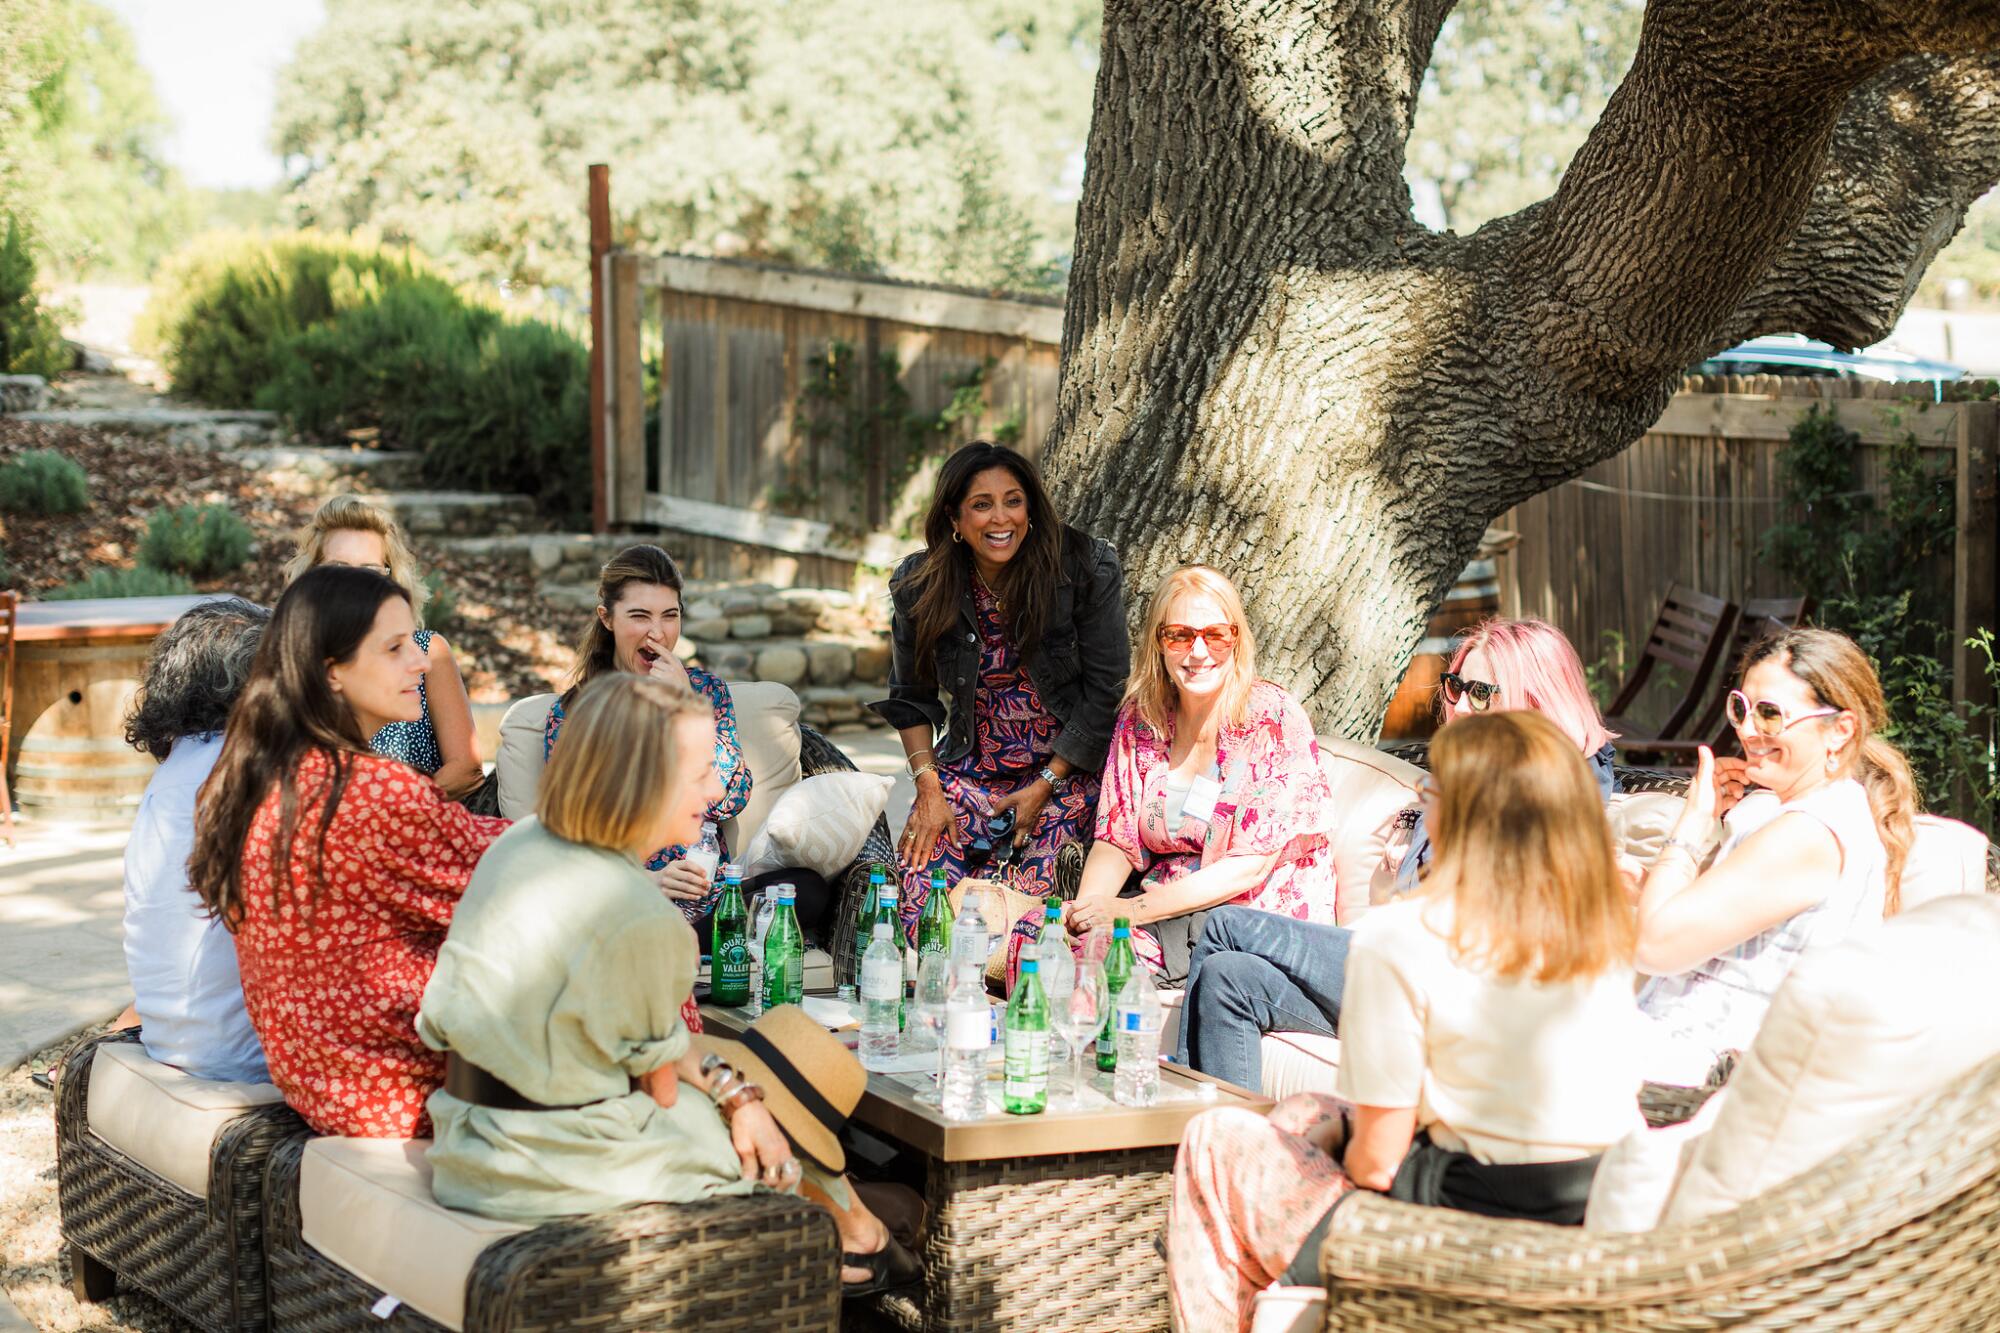 A broup of women eating and drinking under a live oak tree.